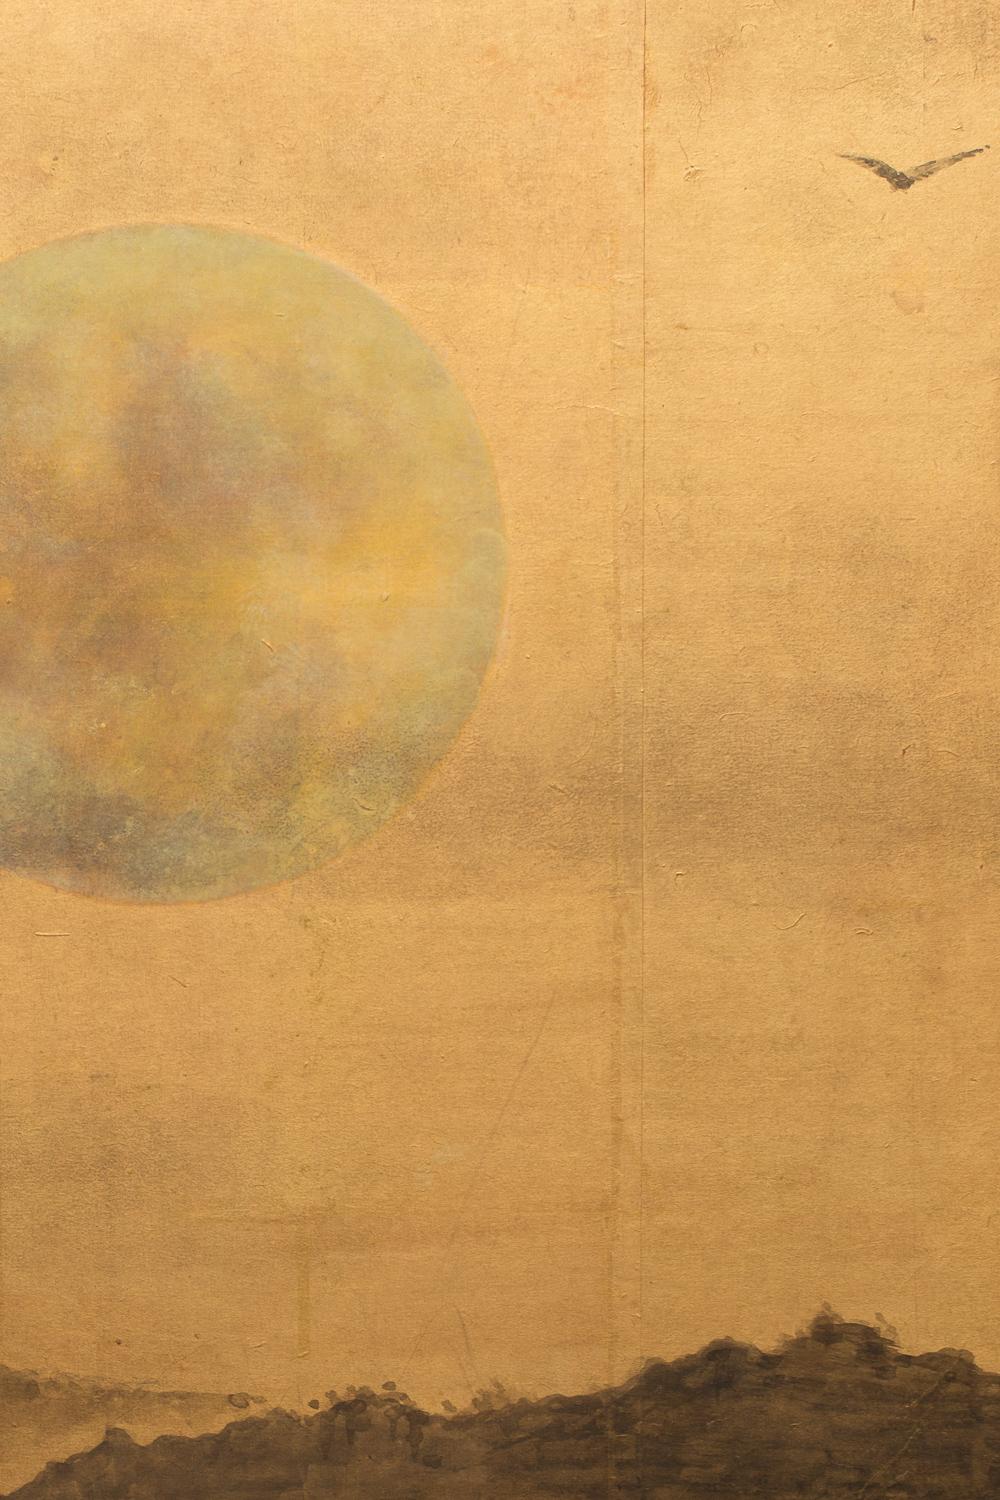 Japanese Two Panel Screen: Rising Moon Over Minimal Landscape. Showa period (1926 - 1989) painting with a silver moon painted on a gold background and a foreground of mountains and tree landscape. Beautiful use of negative space. Serene and